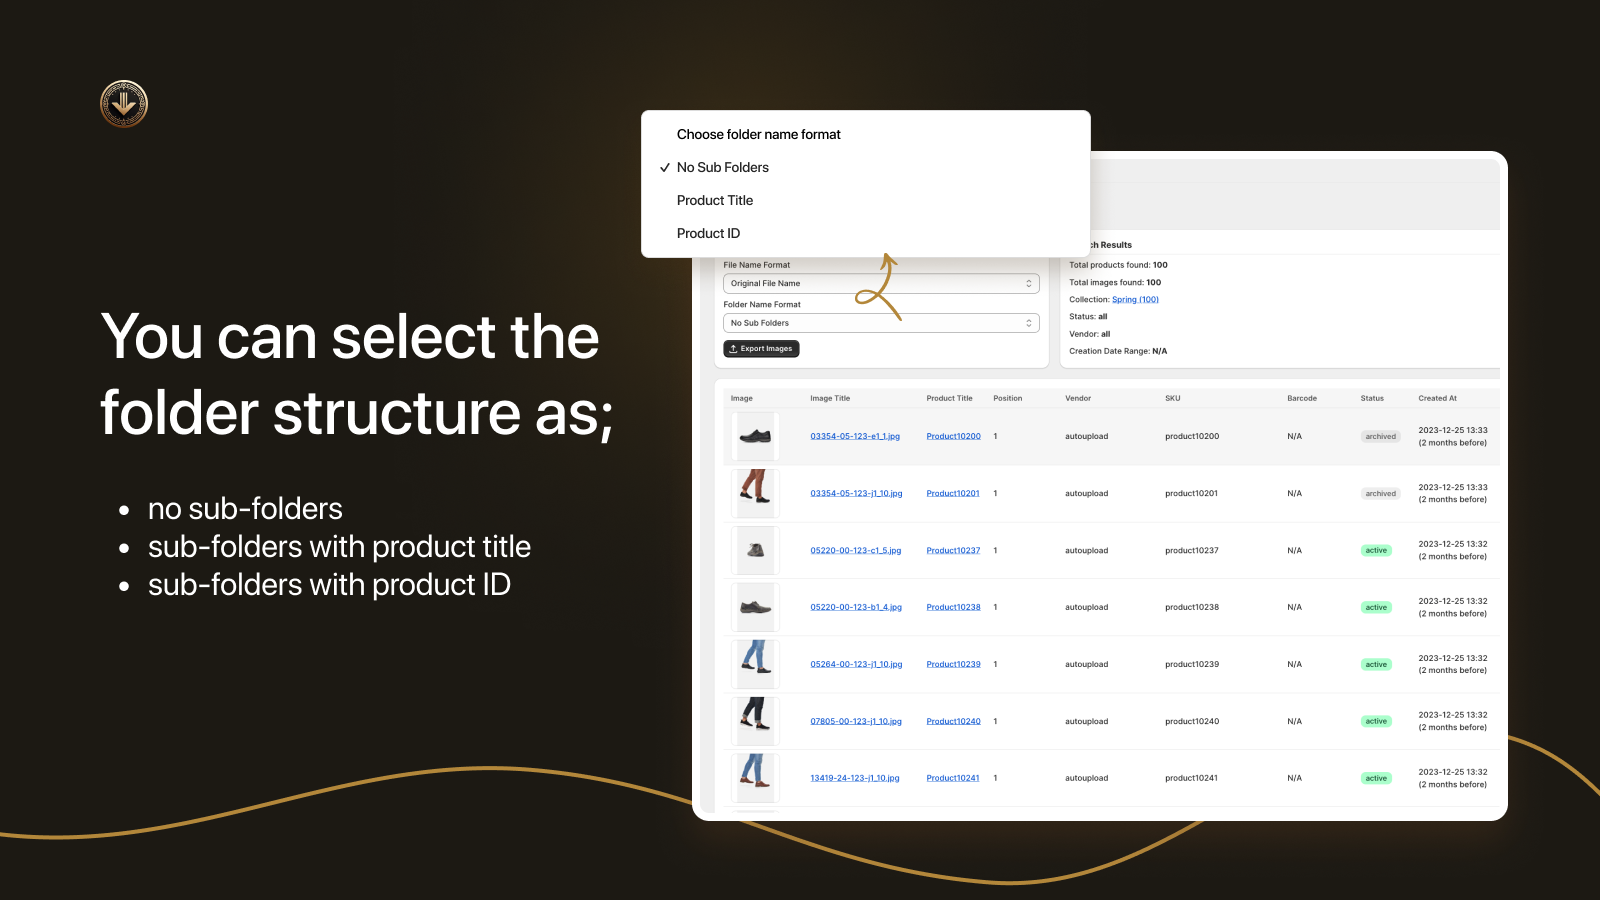 You can select the folder structure for product title and ID